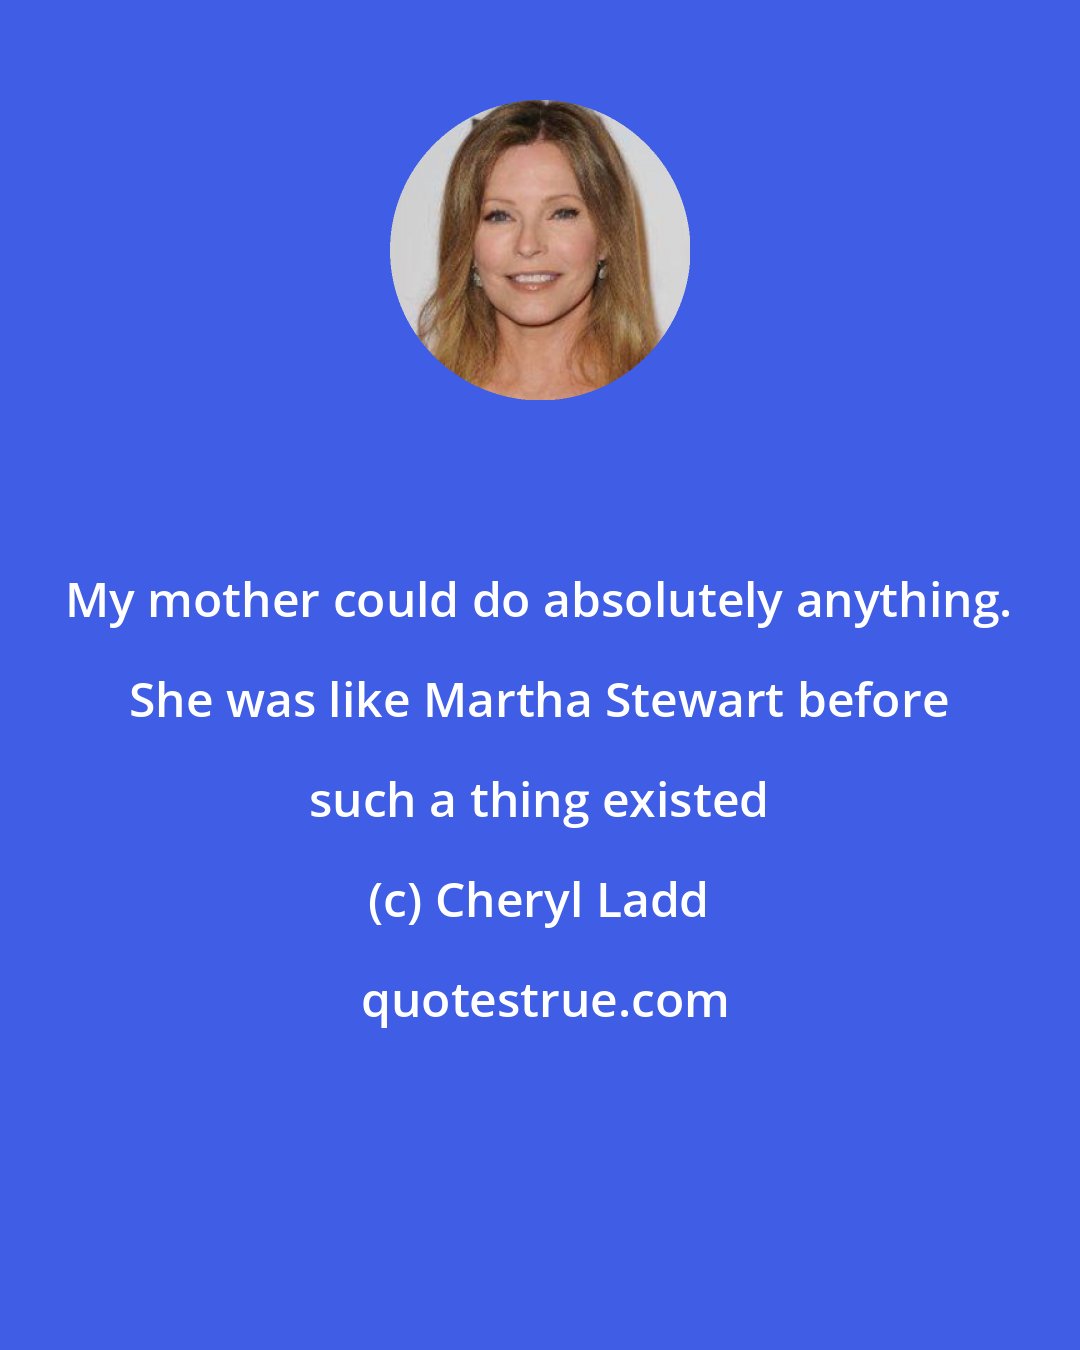 Cheryl Ladd: My mother could do absolutely anything. She was like Martha Stewart before such a thing existed